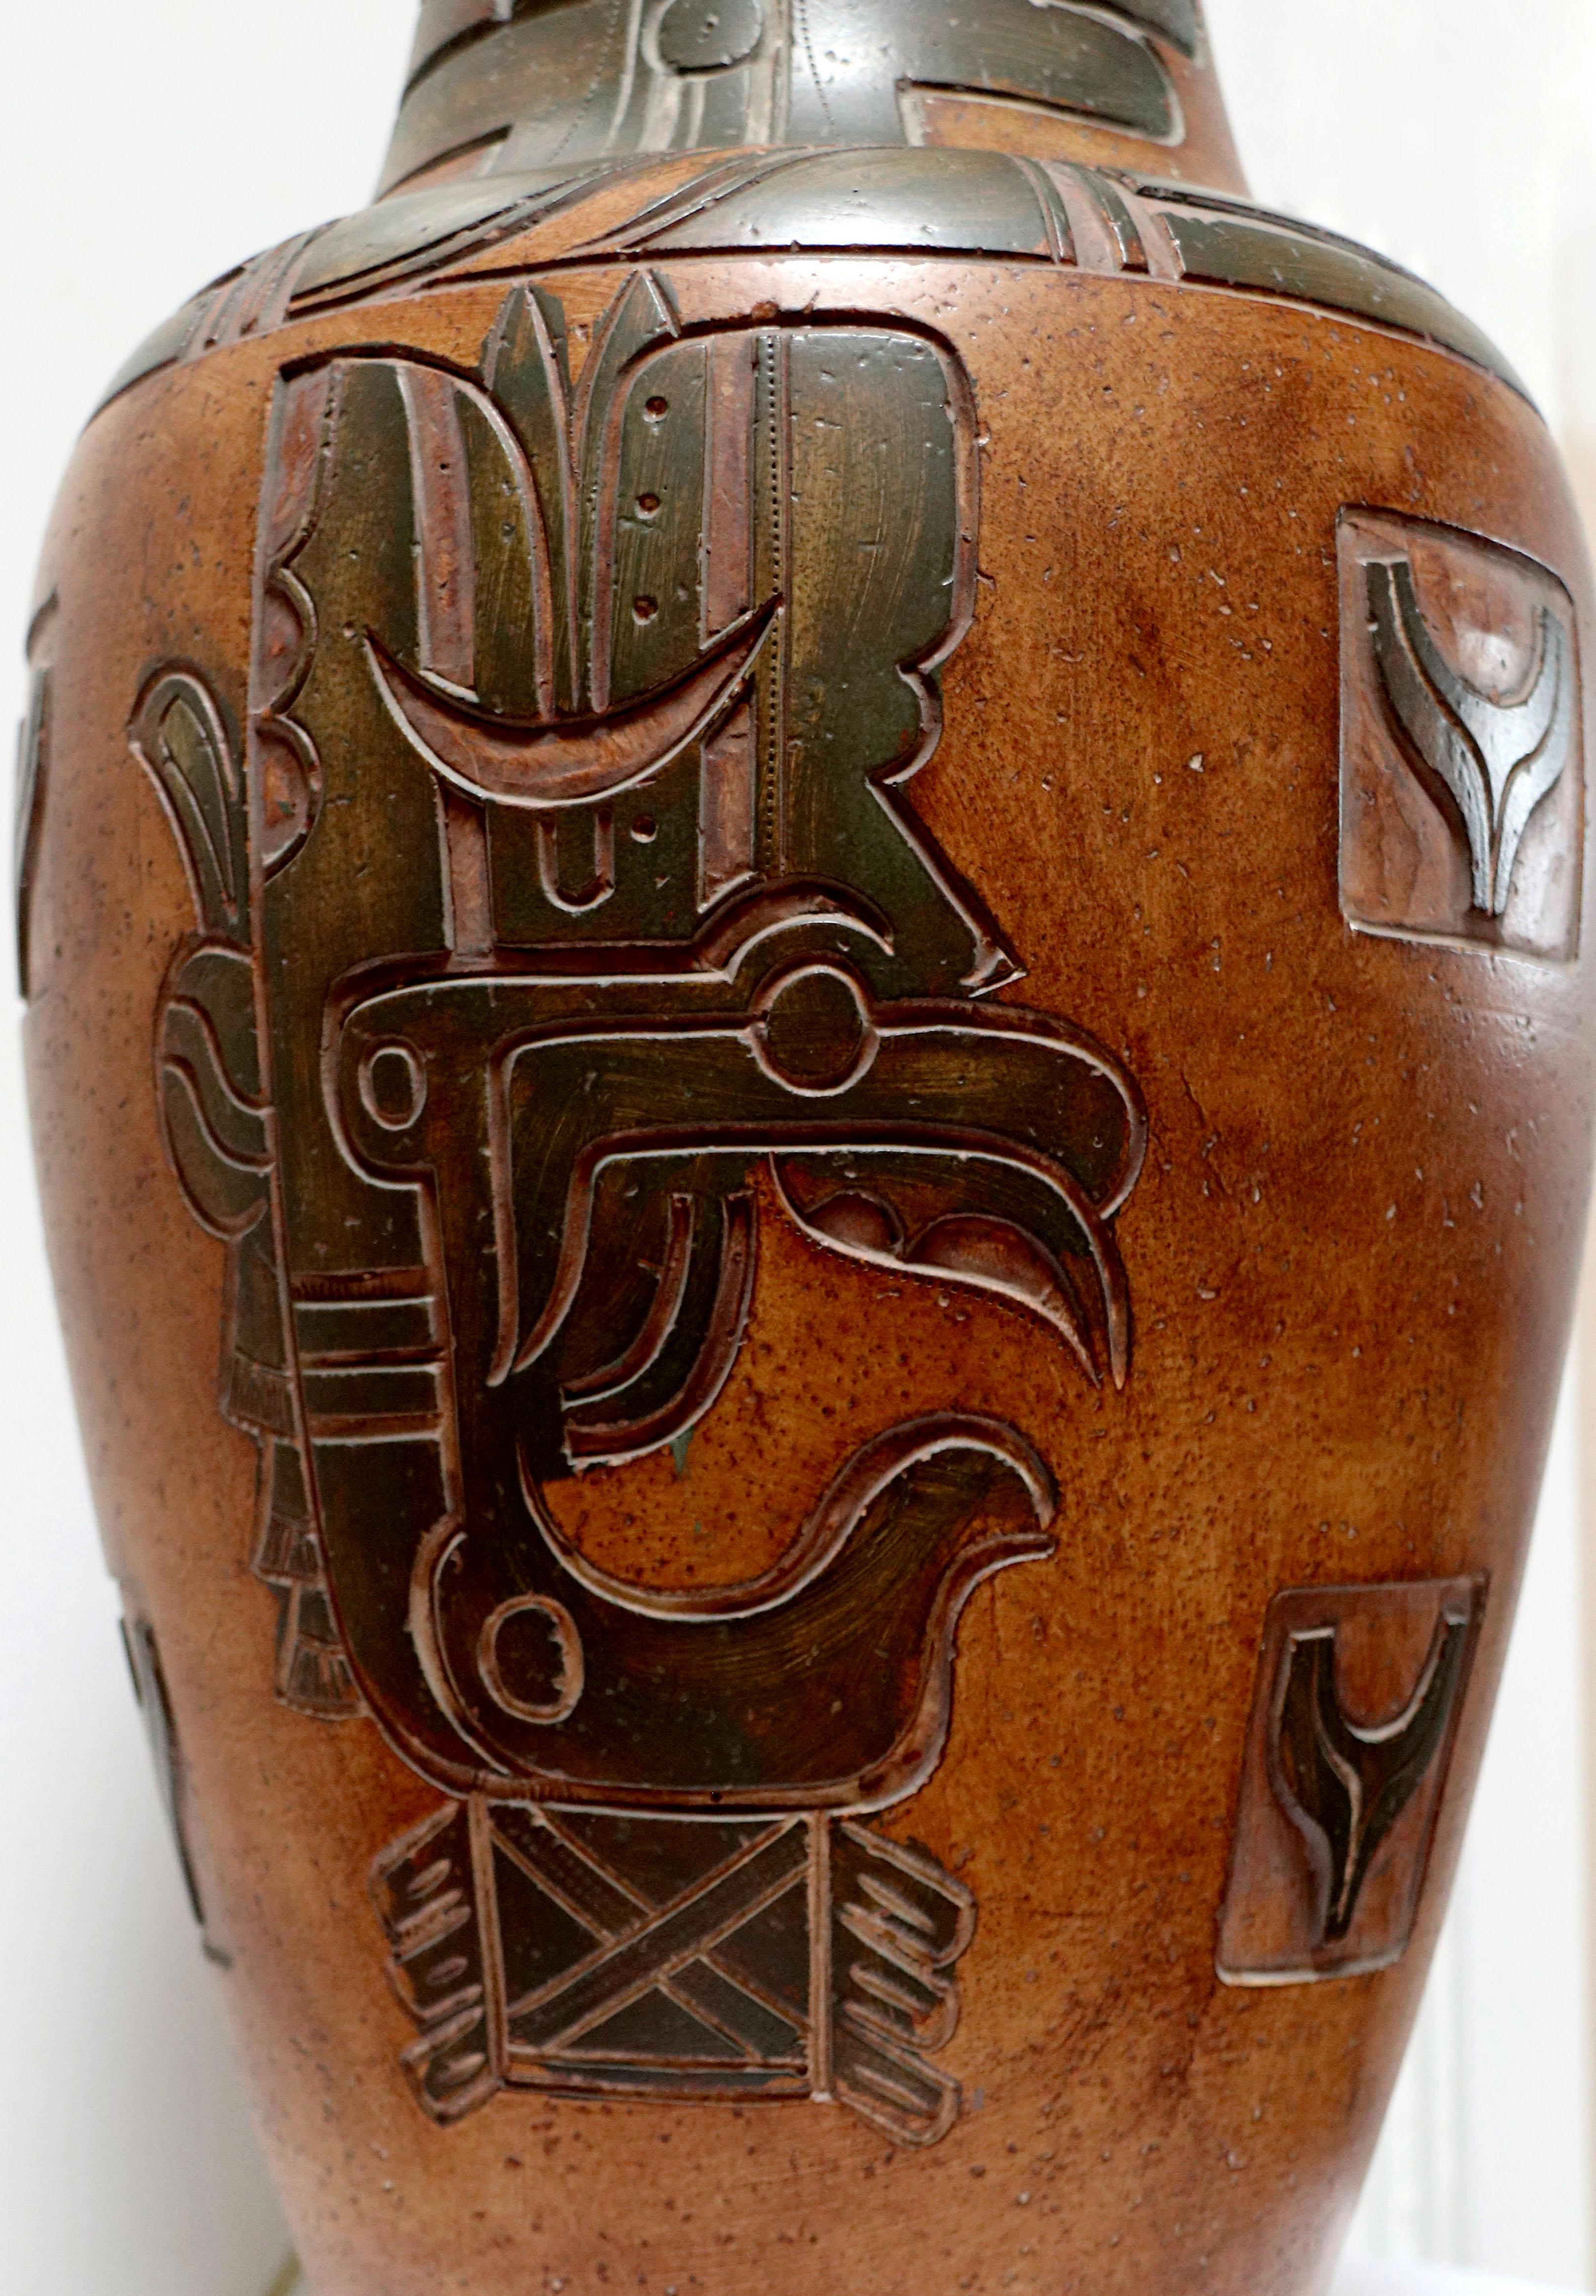 This is a rare find of an extremely large pottery lamp. The incised Mayan-theme etching of this monumental piece makes it a standout. It is precise and elegant, but most of all it is vintage, but still new.
This lamp has never been used and is part